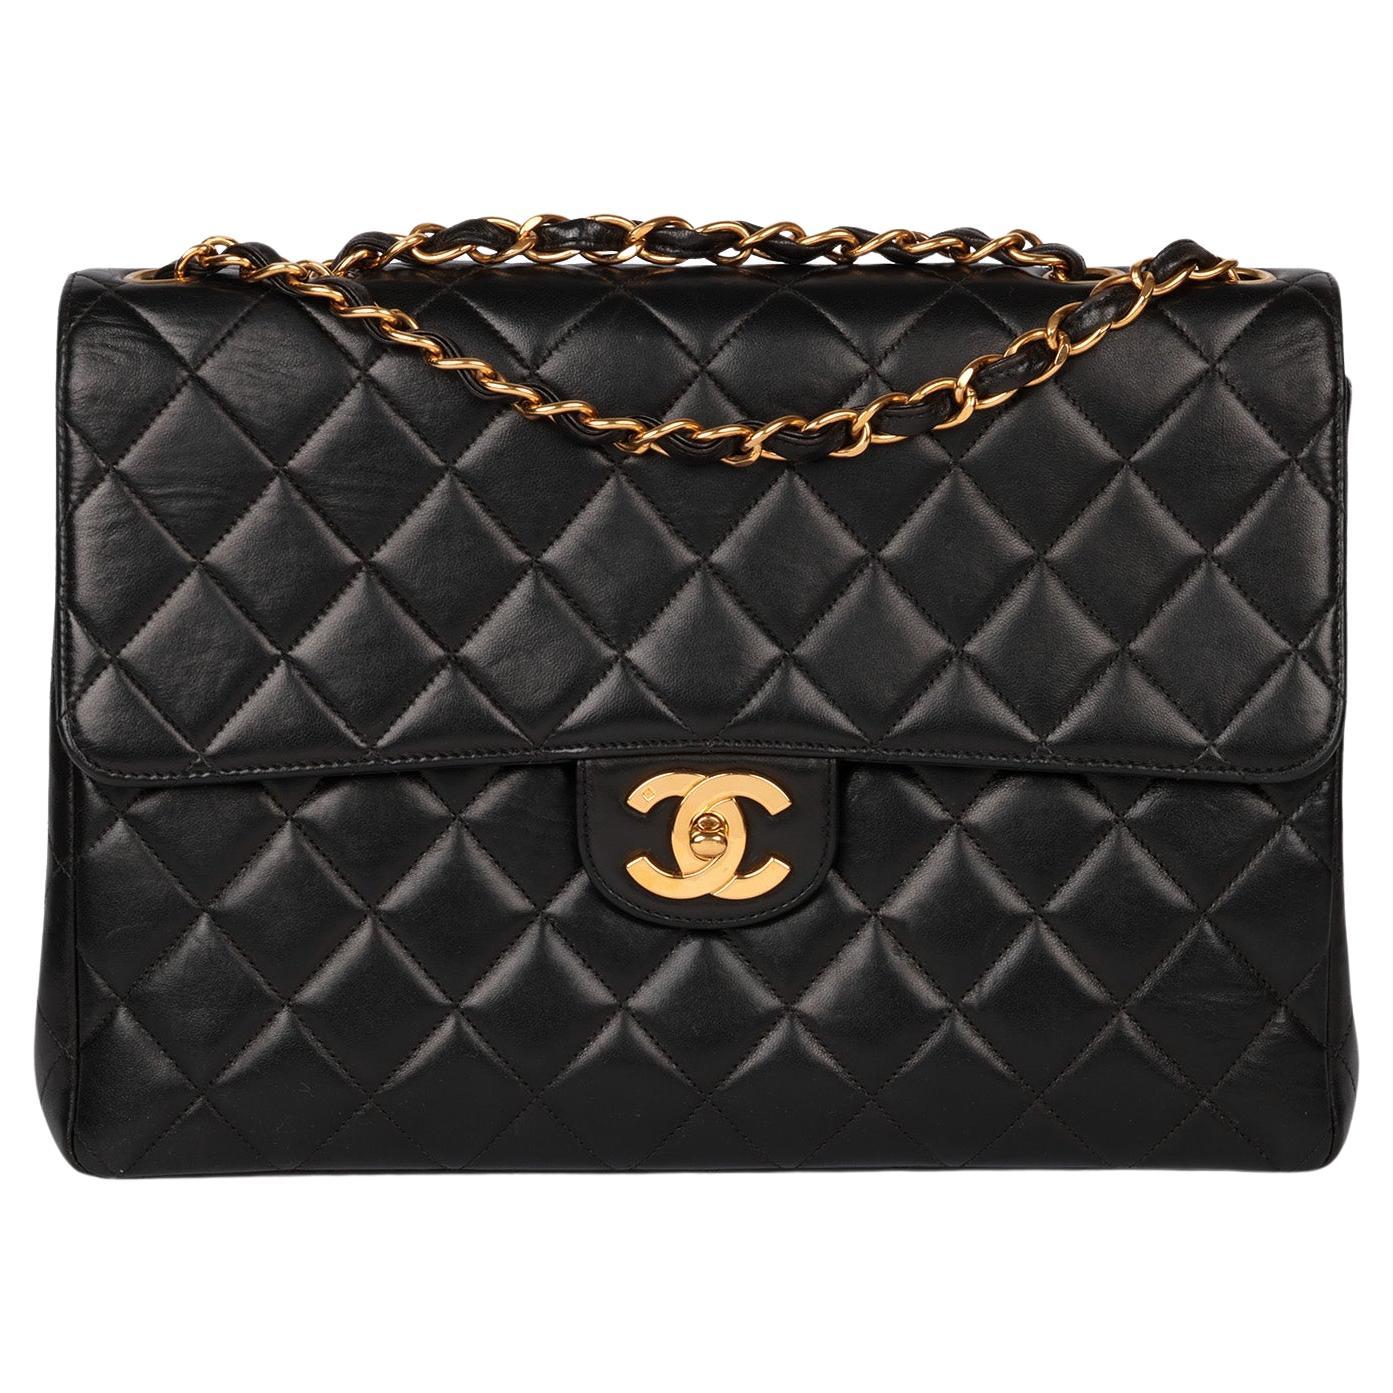 Chanel Black Quilted Lambskin Vintage Jumbo Classic Single Flap Bag